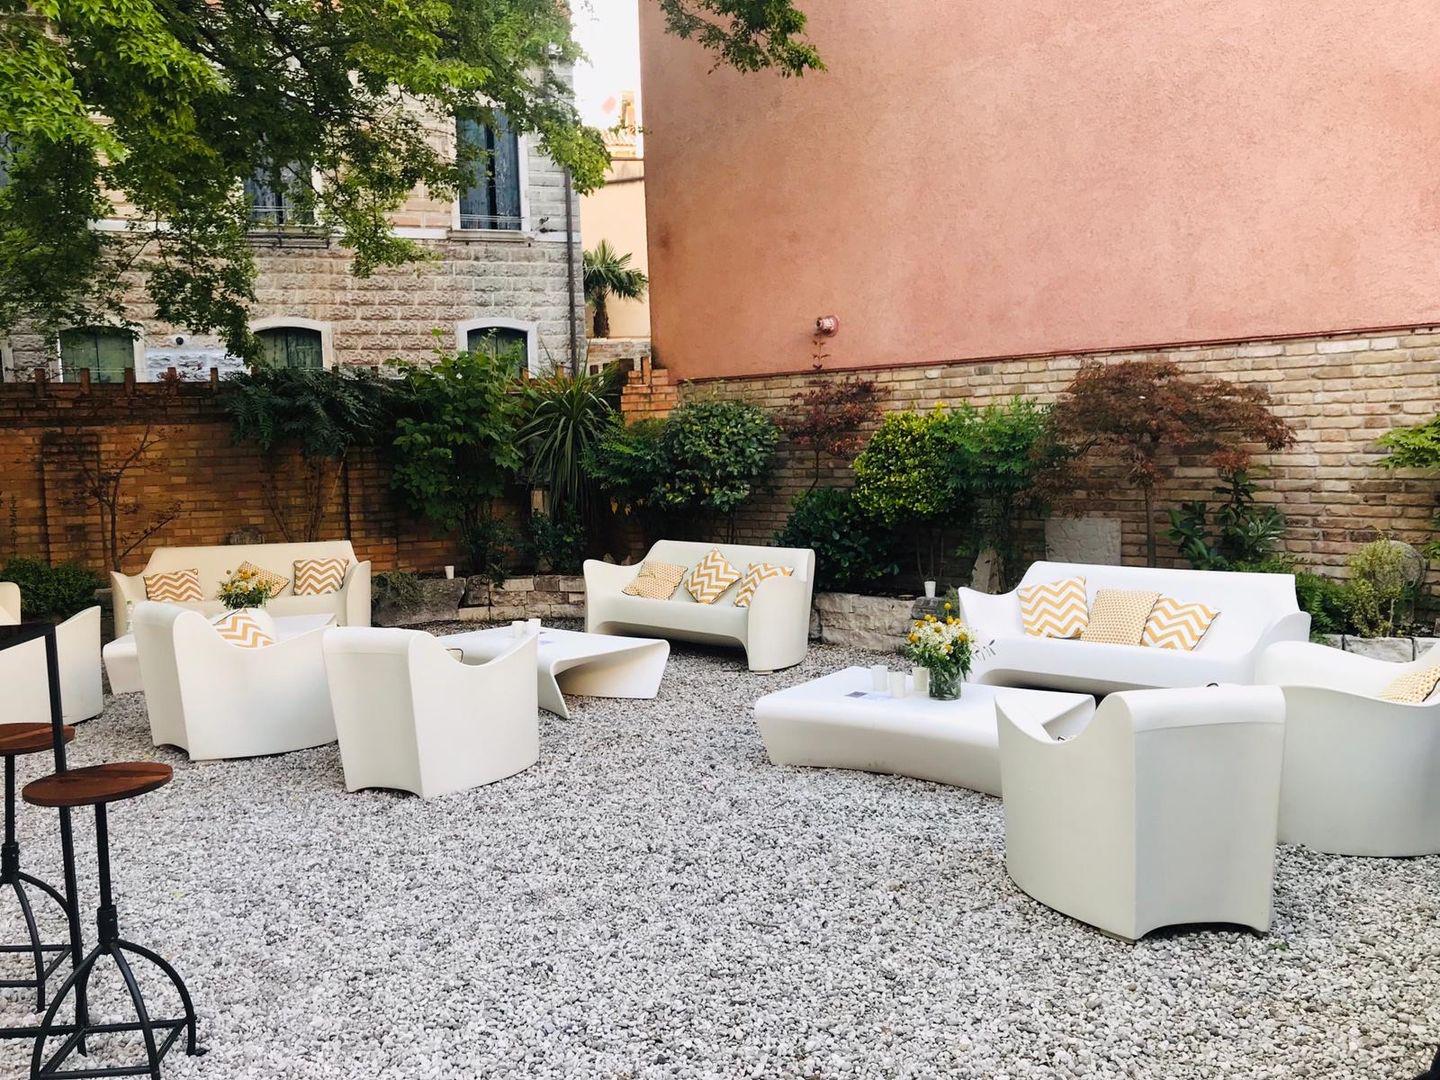 Grand Plie Sofa
Designed by Ludovica & Roberto Palomba
Dimensions:W2420 x D1450 x H820 mm
Suitable for outdoor use, structure in polythylene in white or light grey

An outdoor sofa but designed for the old aged and very noble art of conversation. In